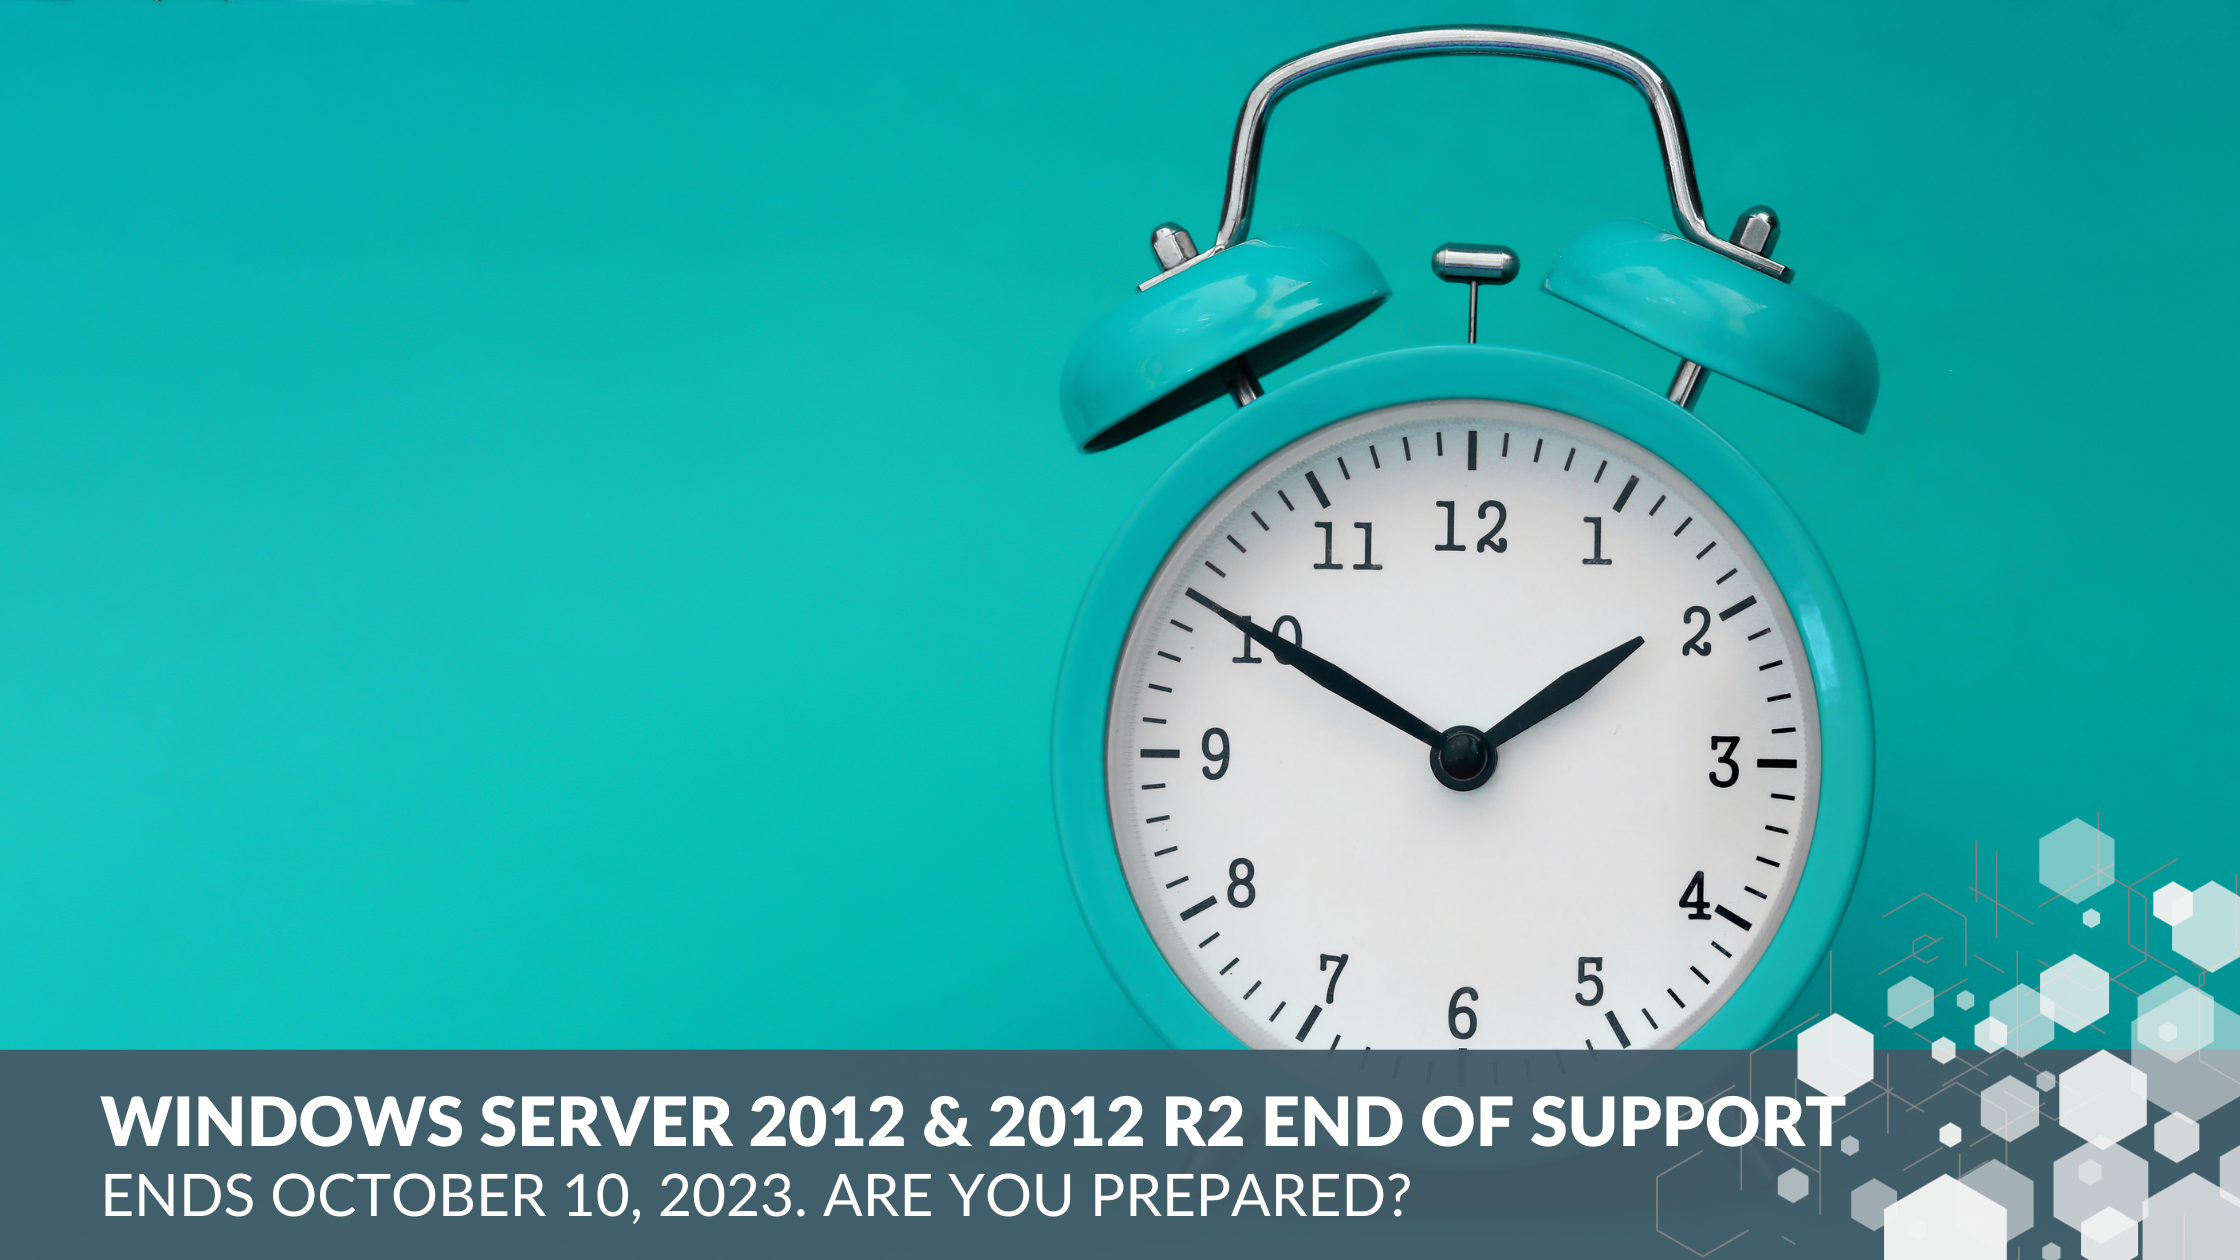 Windows SQL Server 2012 and 2012 R2 End-of-Support